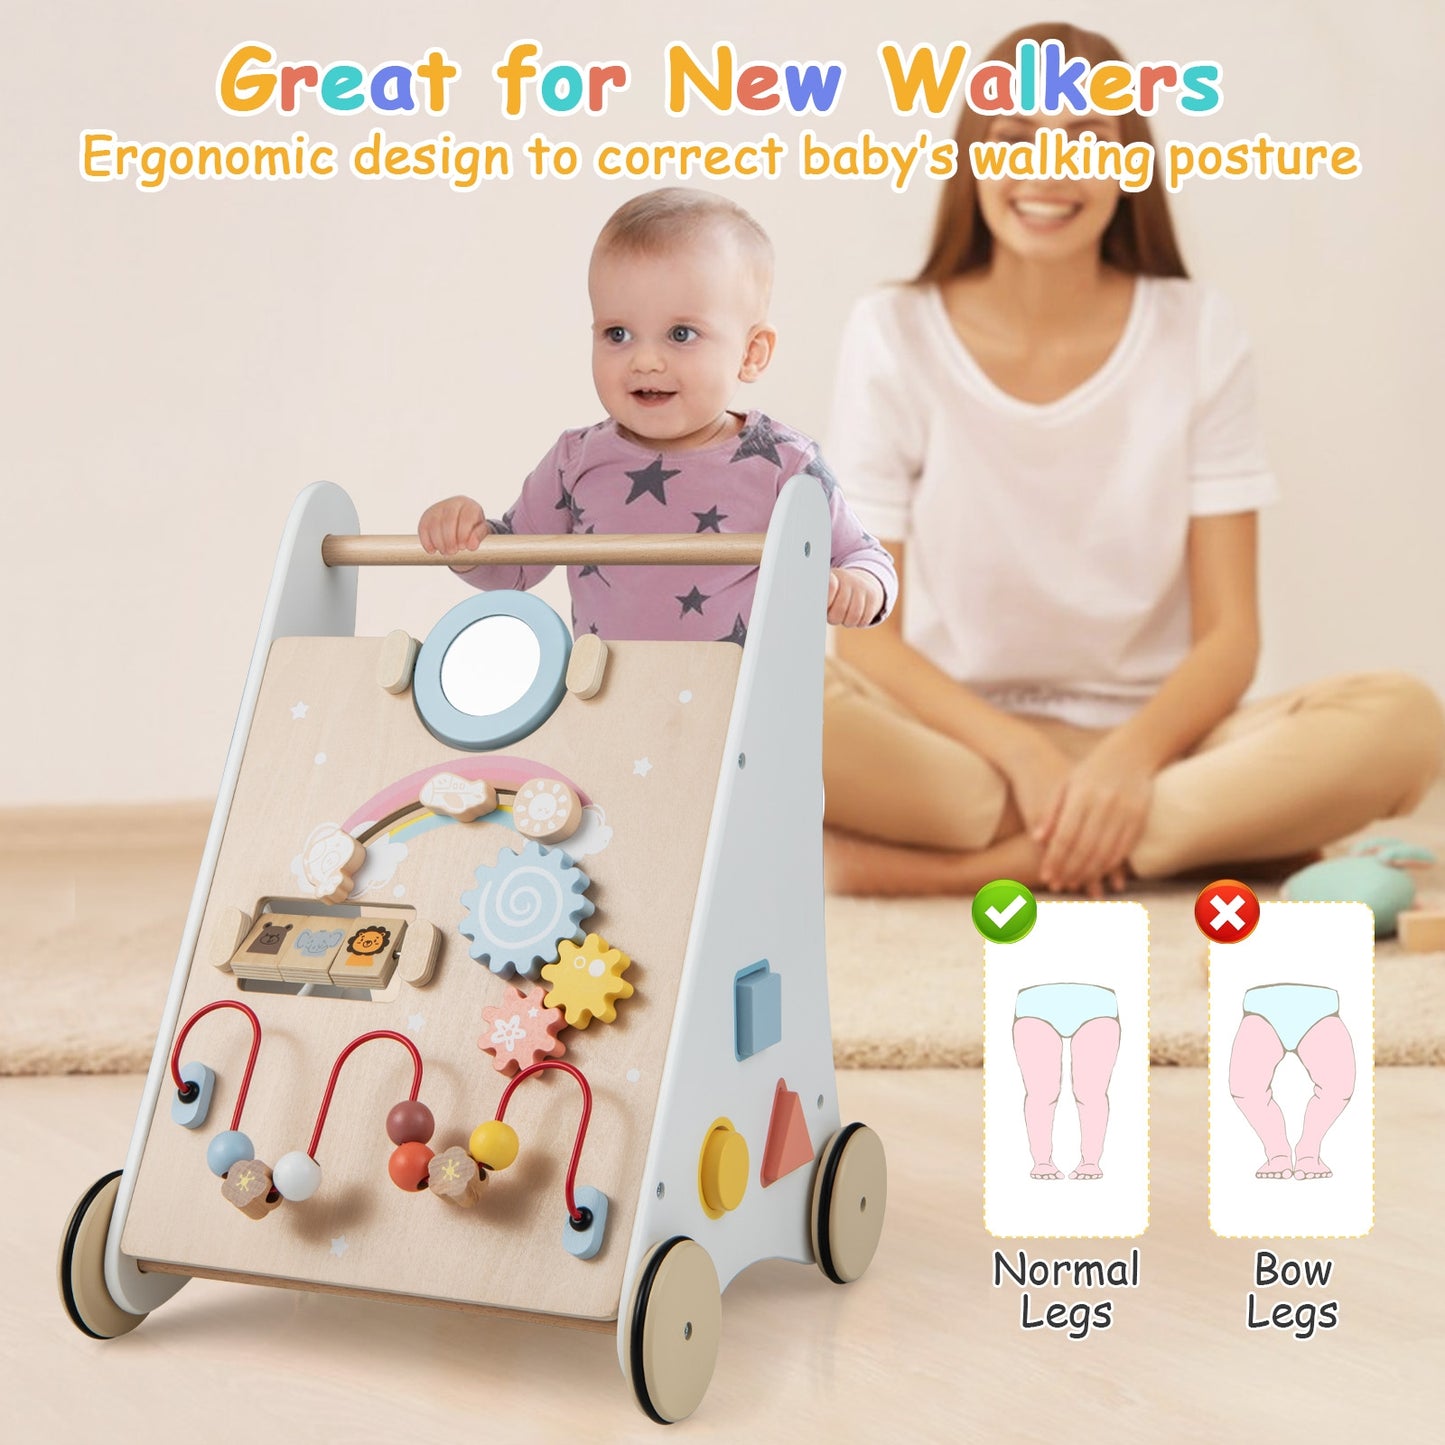 Wooden Baby Walker with Multiple Activities Center for Over 1 Year Old-White